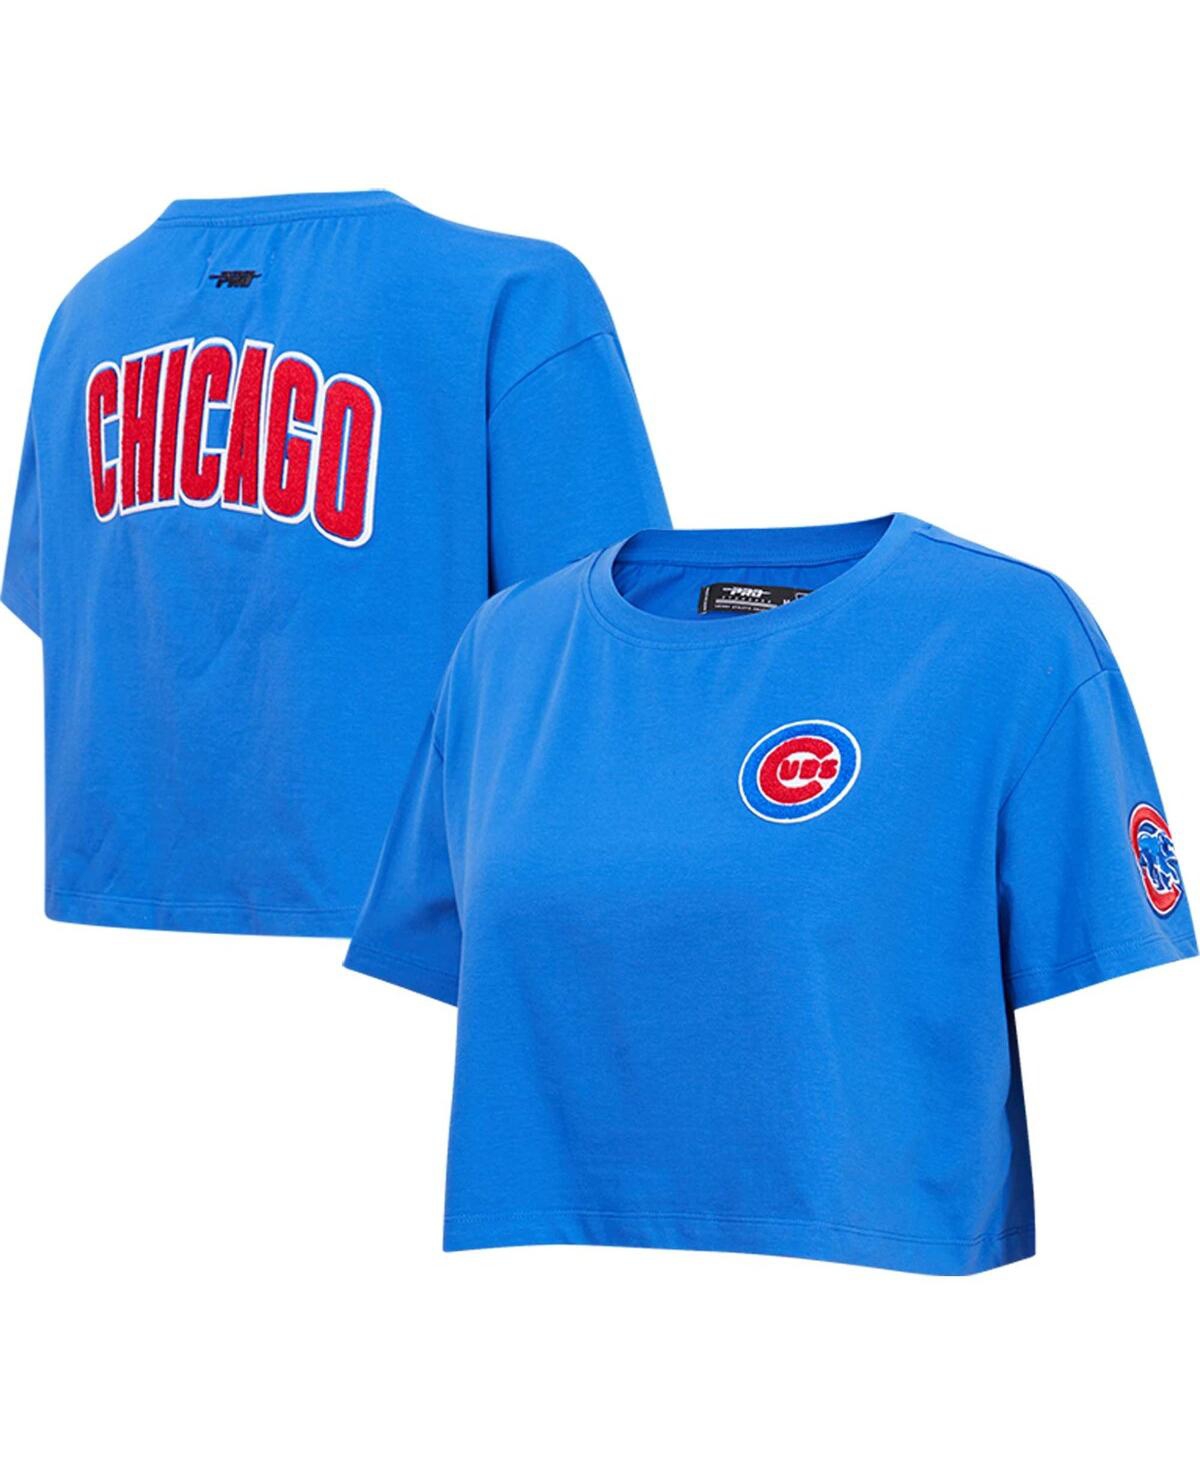 Women's Pro Standard Royal Chicago Cubs Classic Team Boxy Cropped T-shirt - Royal